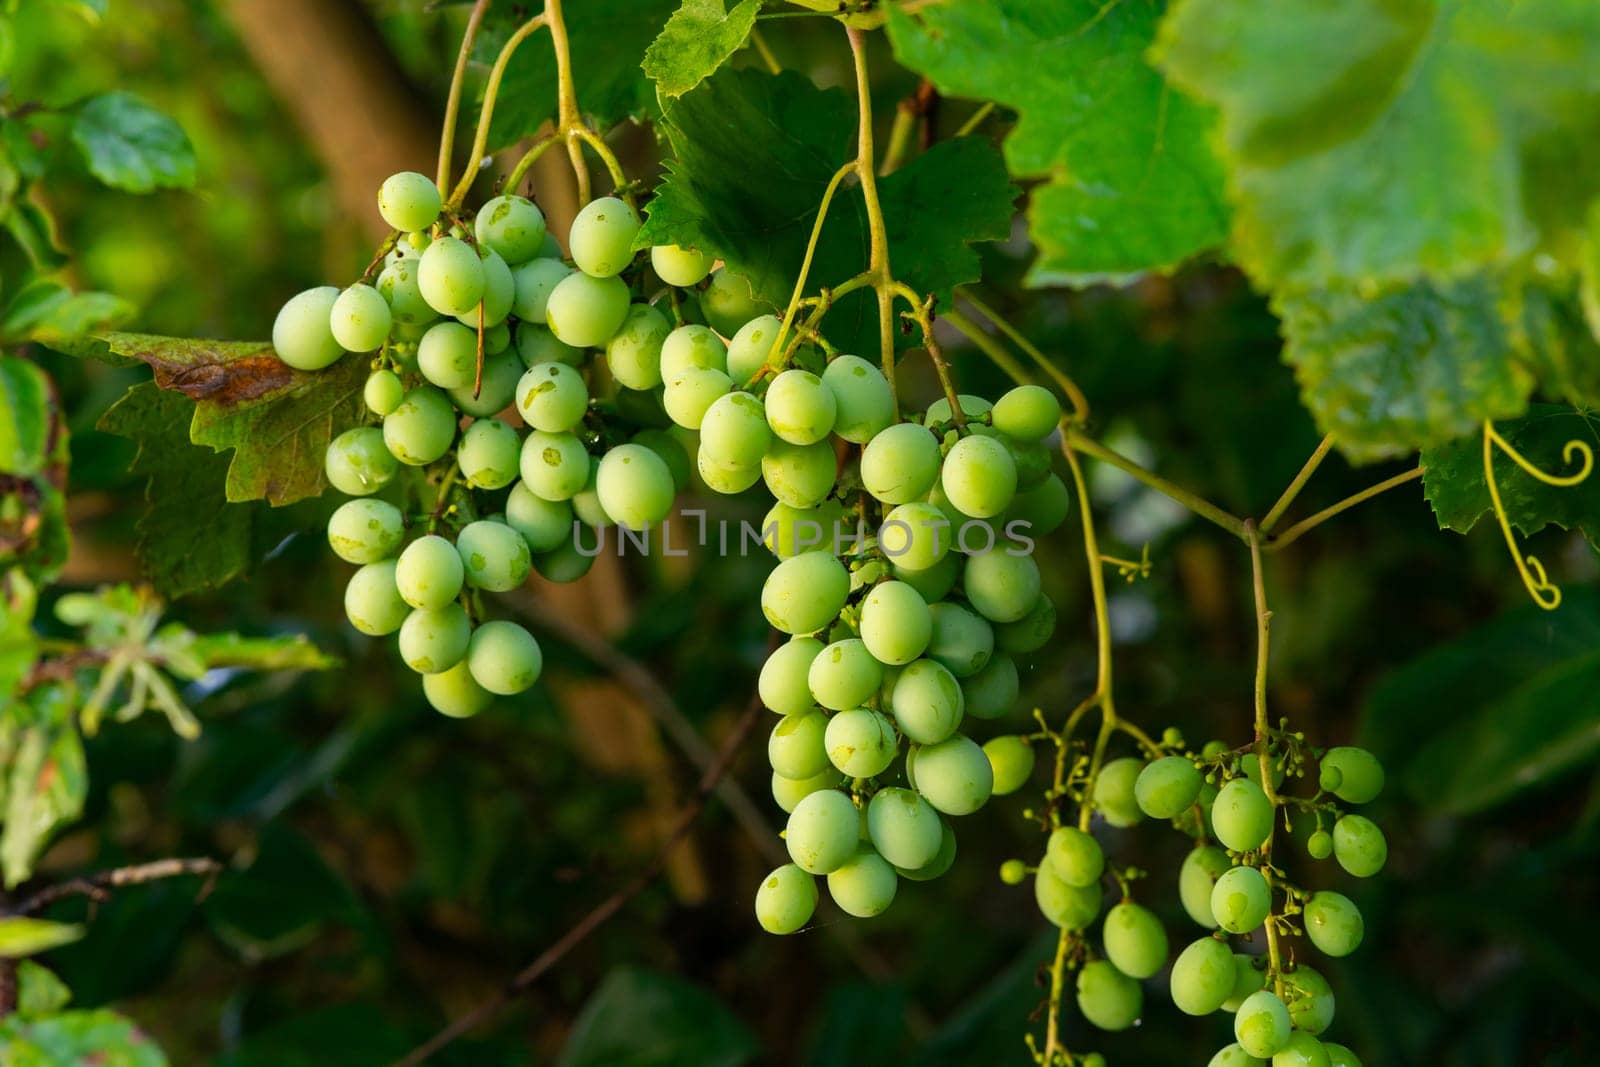 Several bunches of green grapes grow on a vine by Serhii_Voroshchuk